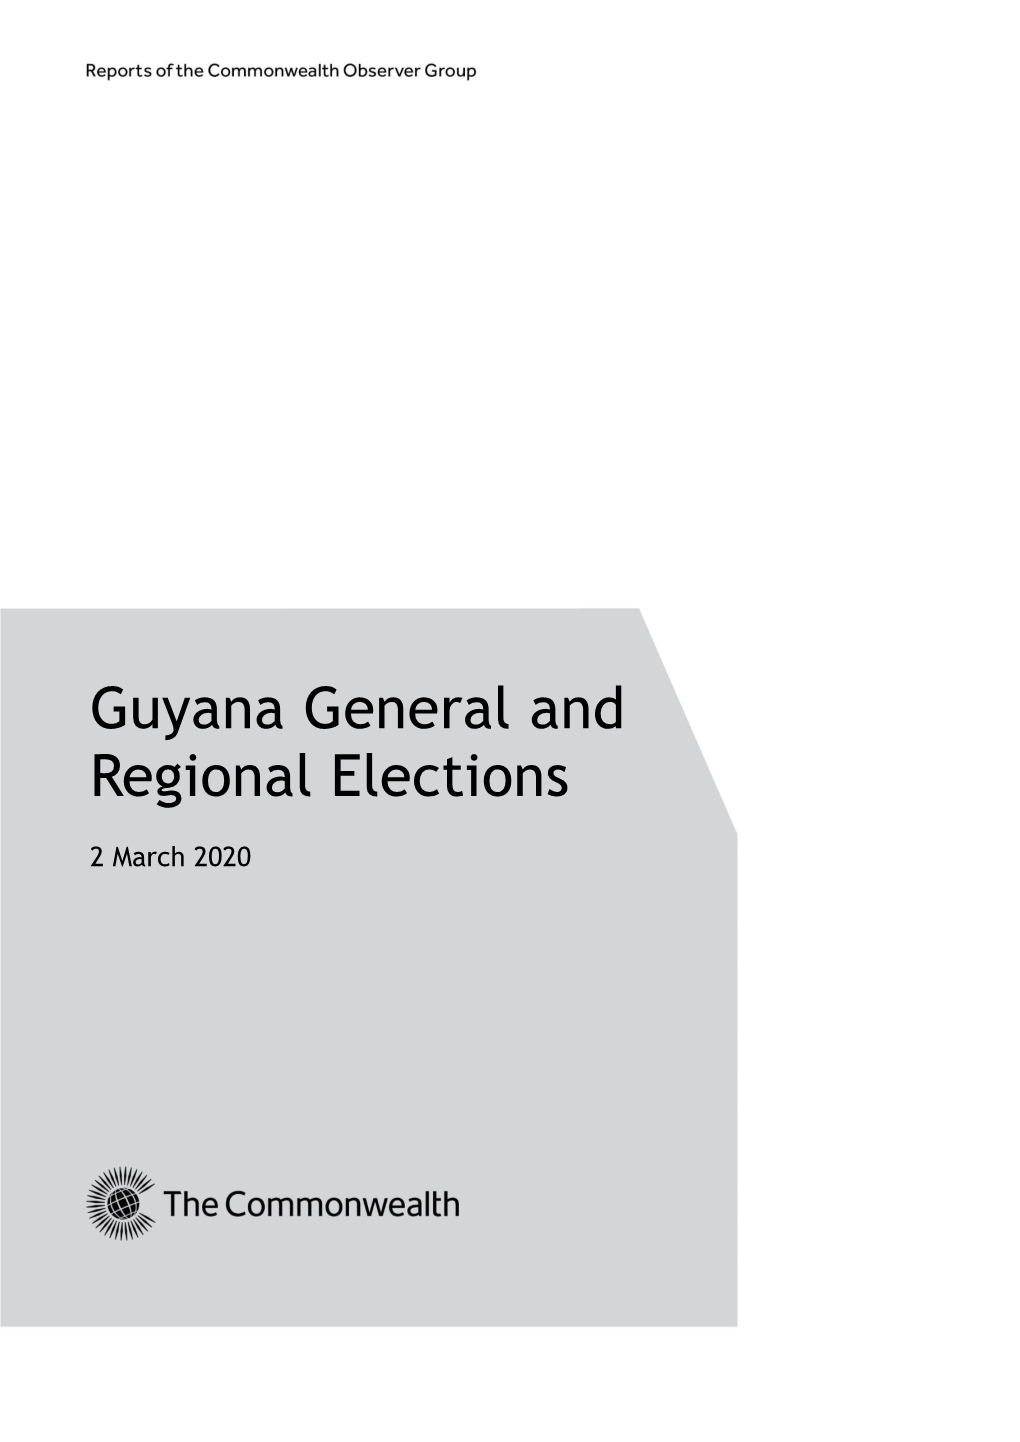 Guyana General and Regional Elections